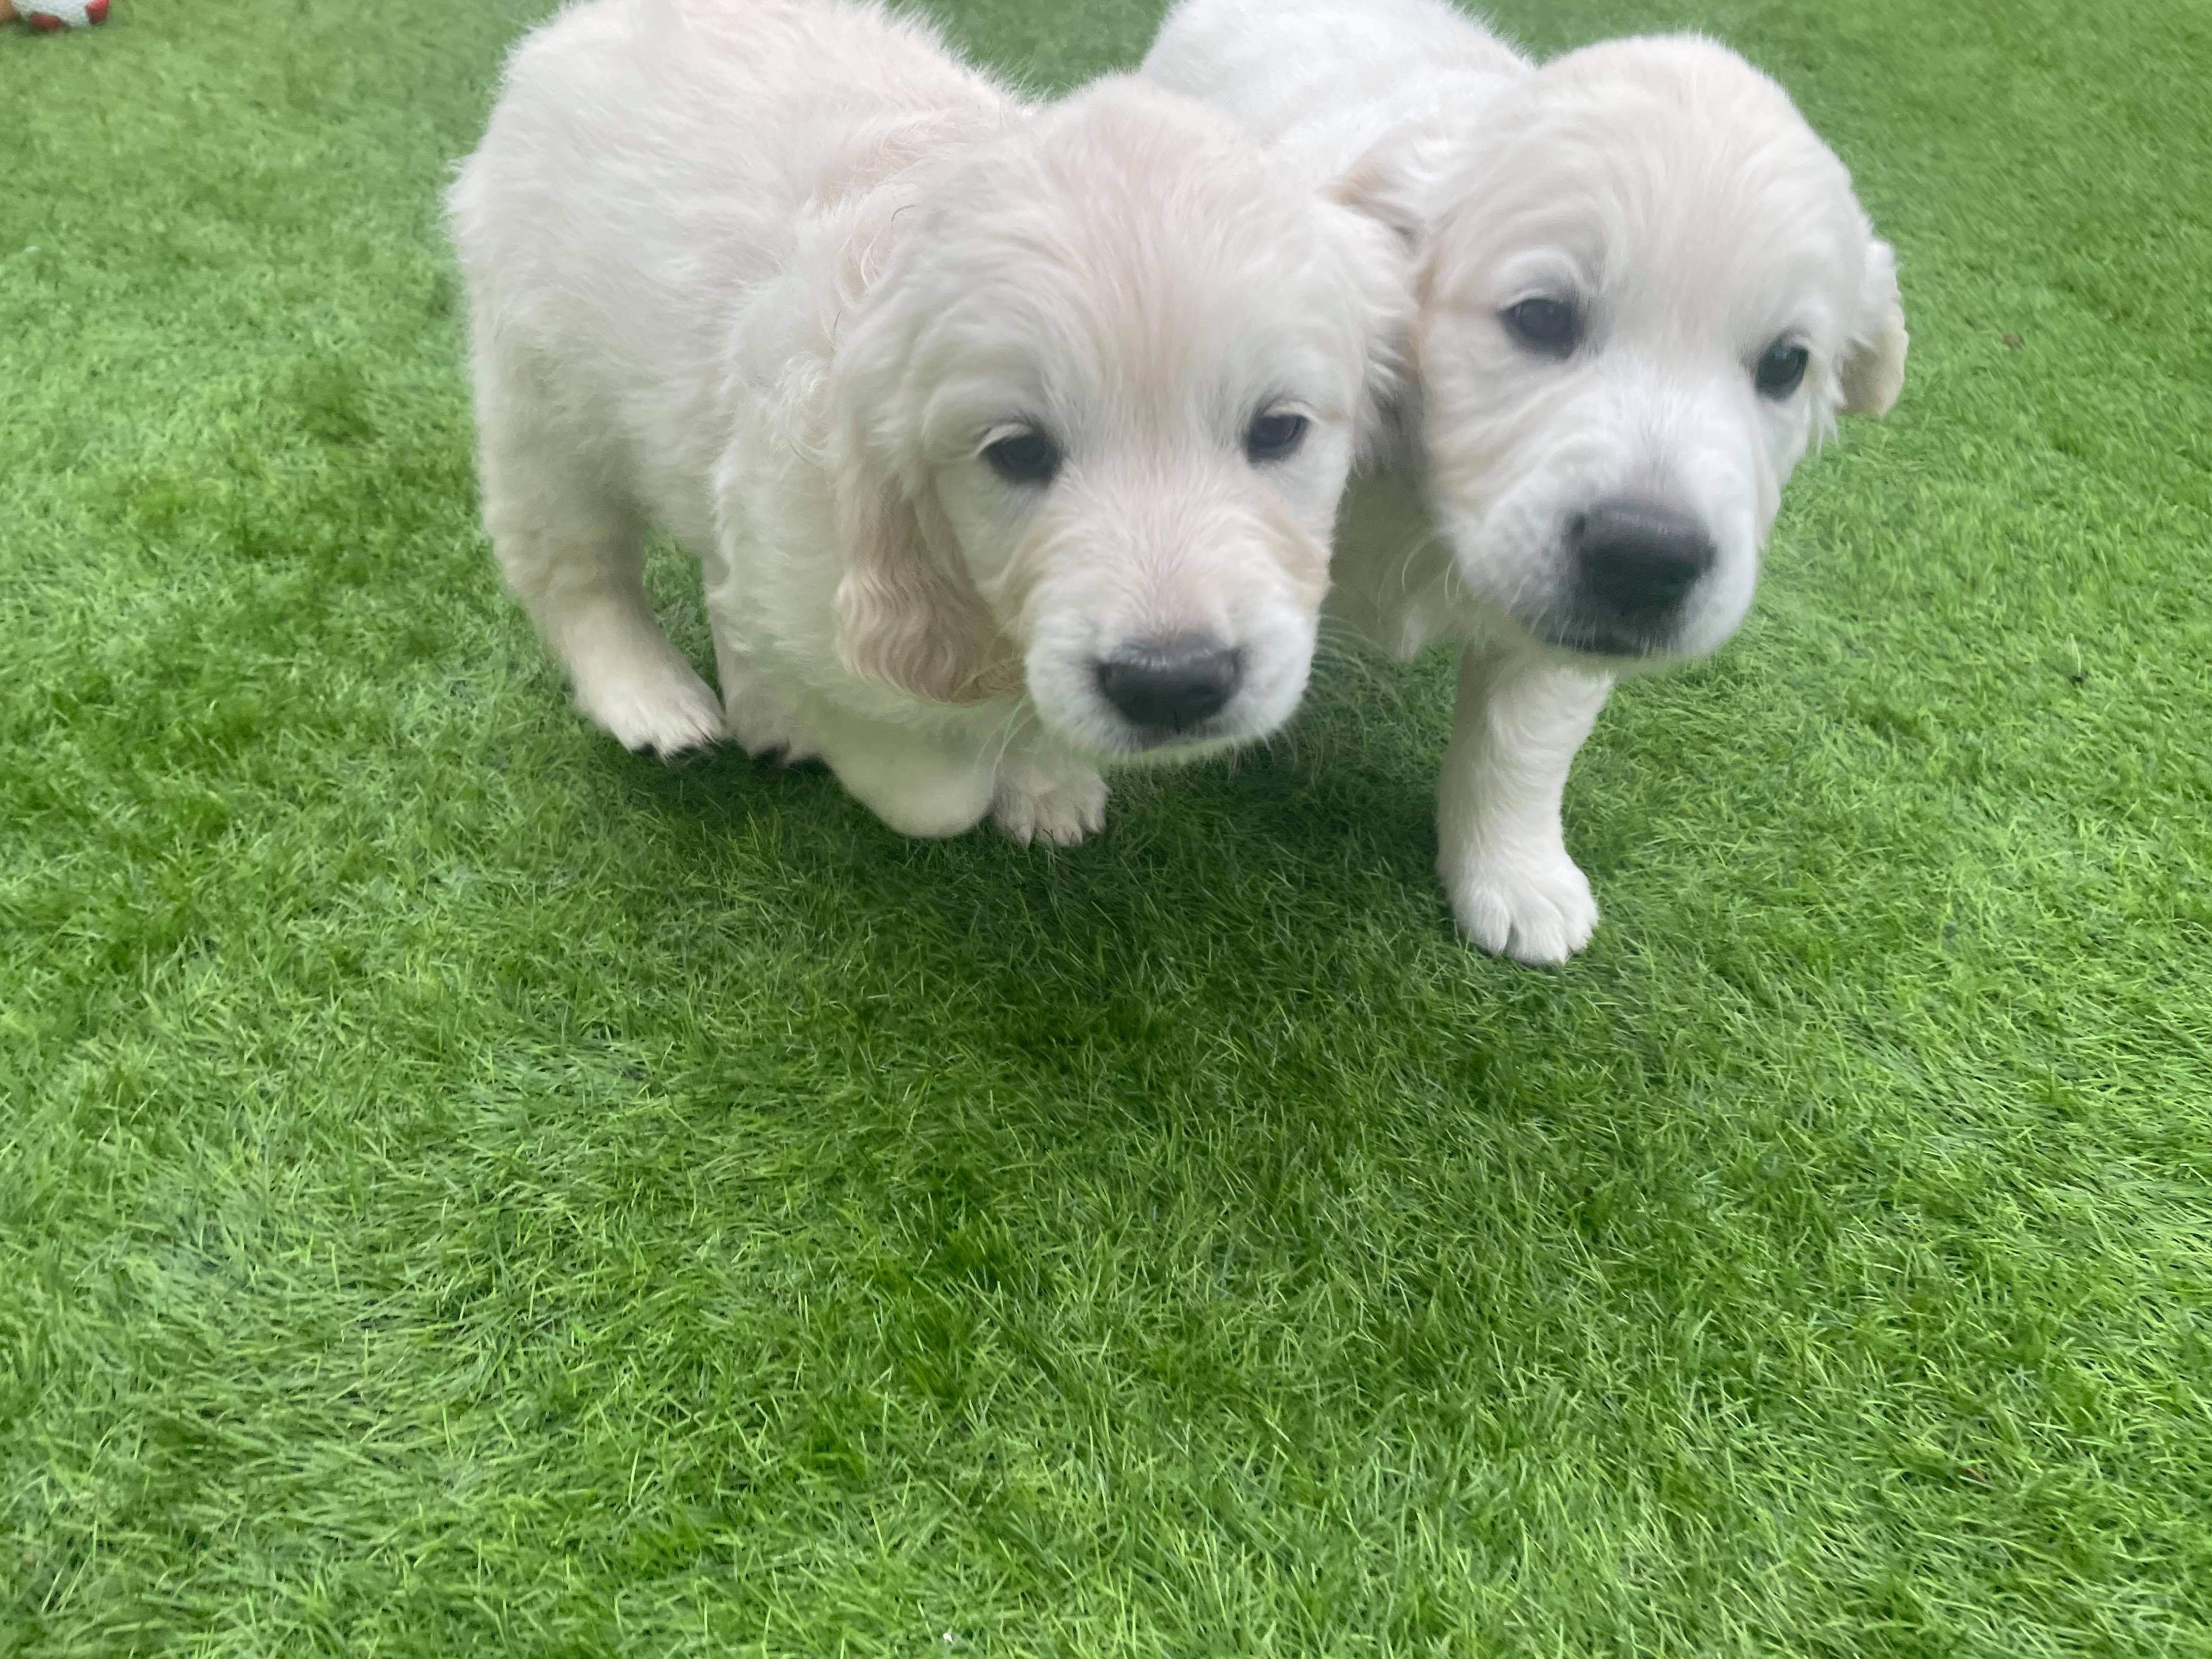 Boy & girl available,microchipped & health checked